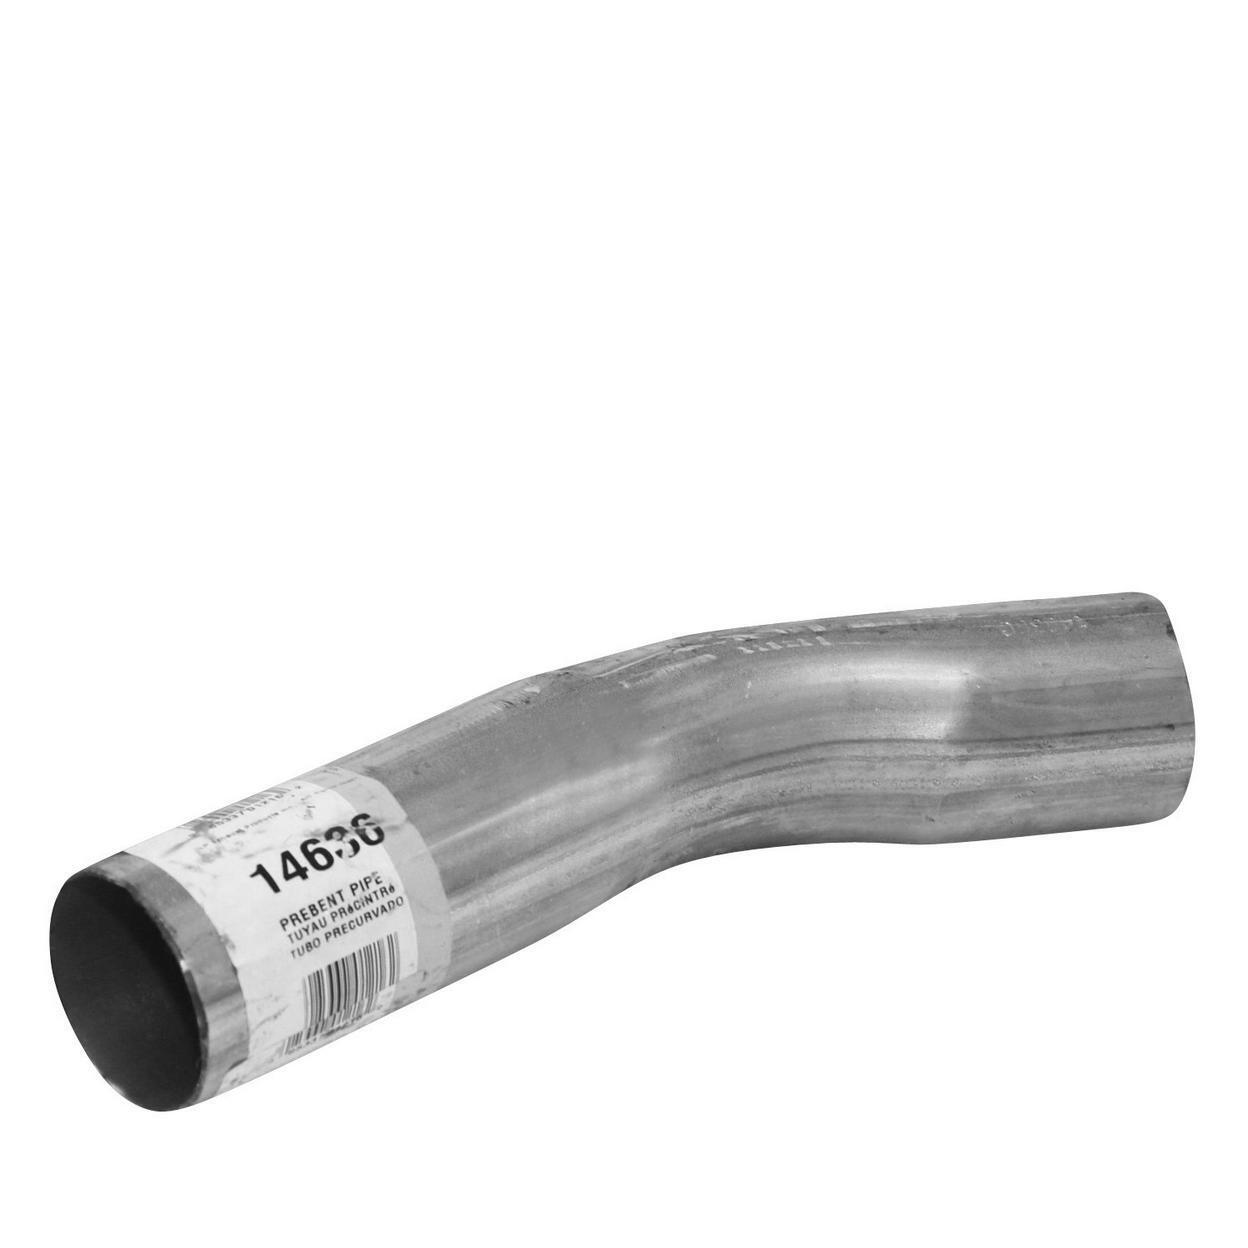 14636-CT Exhaust Tail Pipe Fits 1990-1991 Oldsmobile Cutlass Calais 2.5L L4 GAS